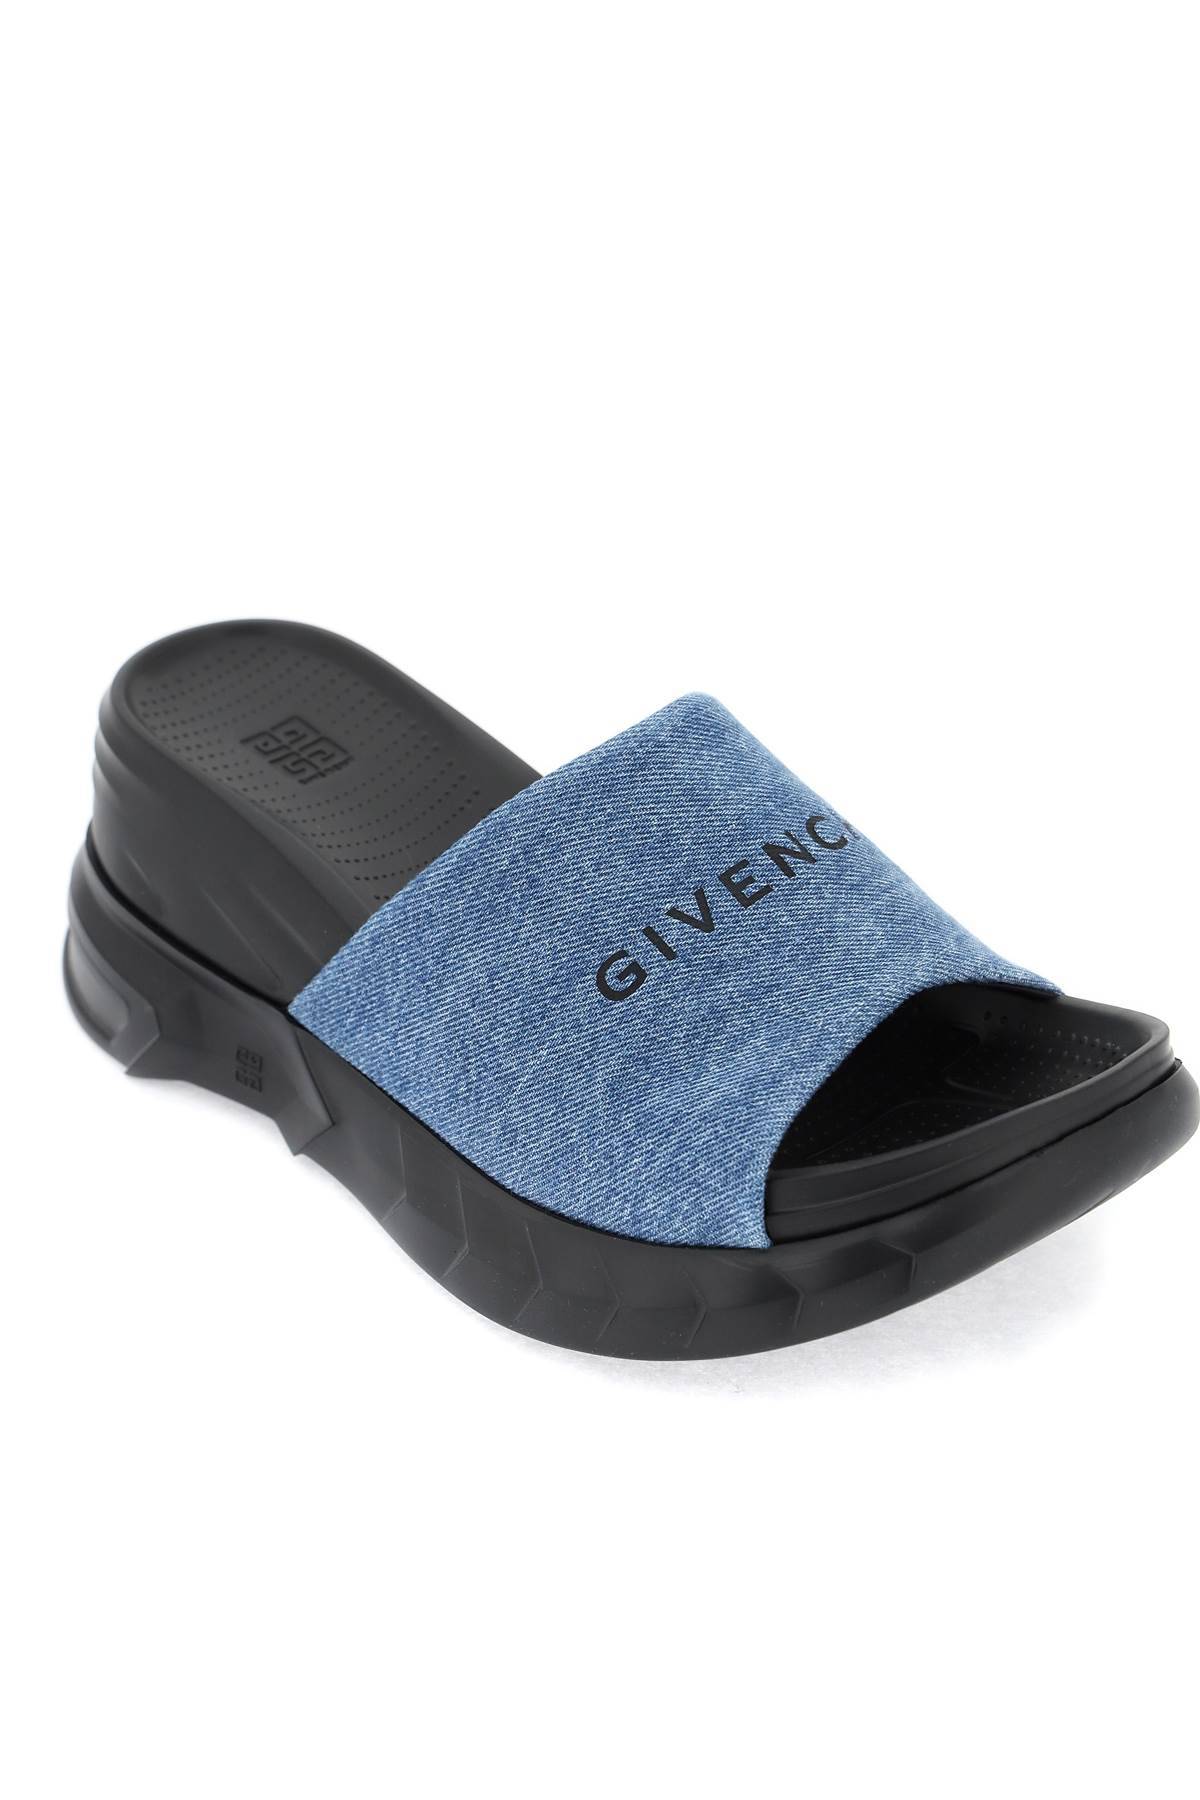 Shop Givenchy Marshmallow Wedge Sandals With Platform In Blue,black